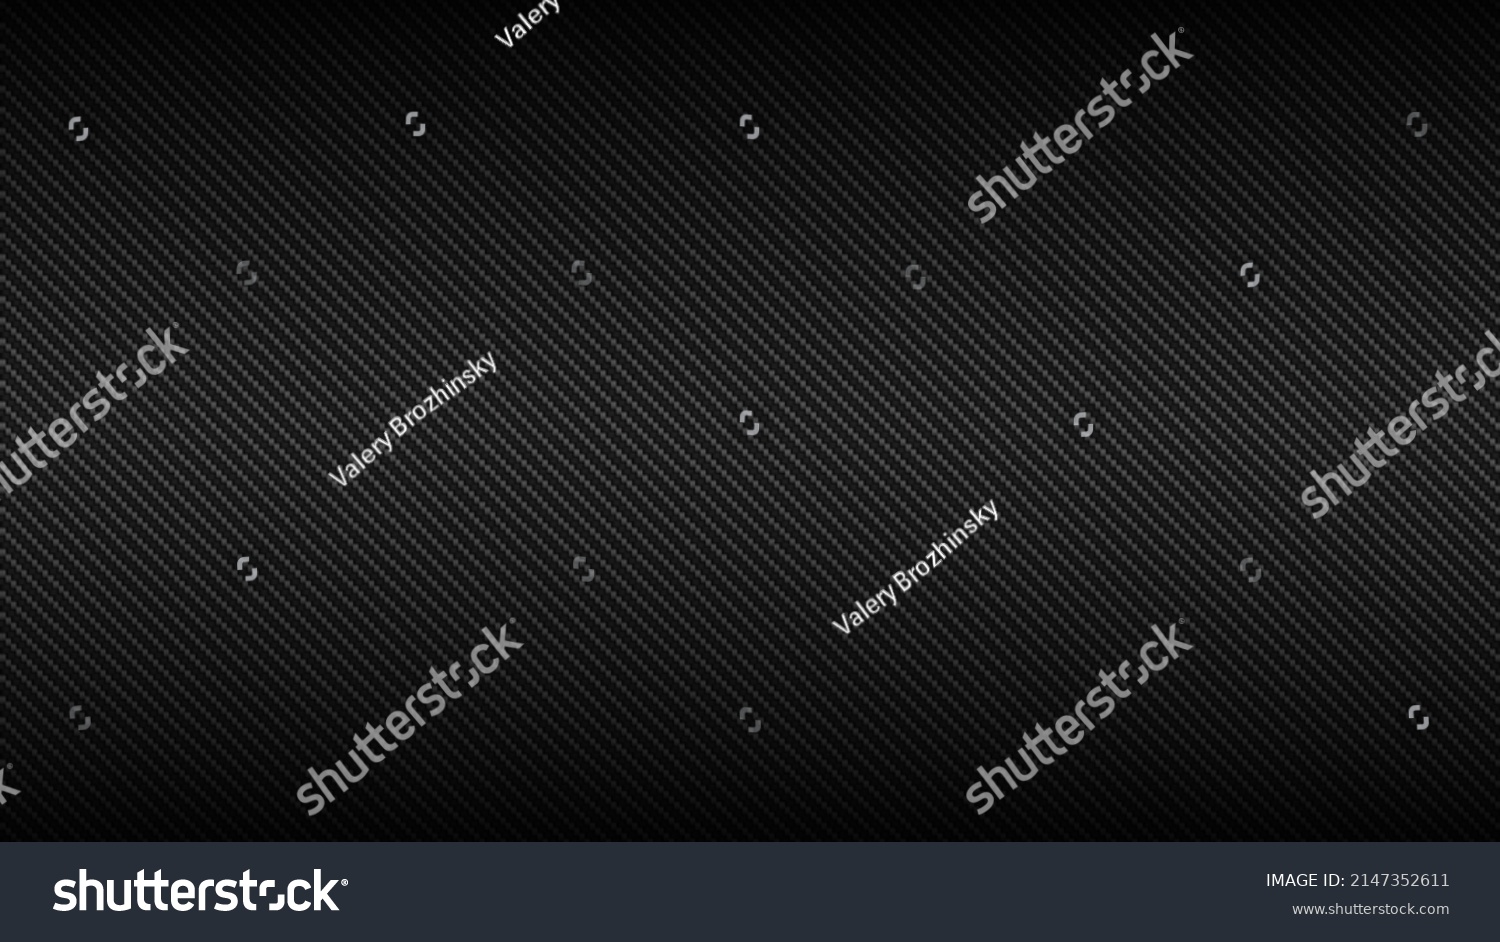 SVG of Carbon fiber background, texture. Car design element, graphic. Auto racing theme. Car body. Dark gray carbon, black and white texture. Vector illustration svg